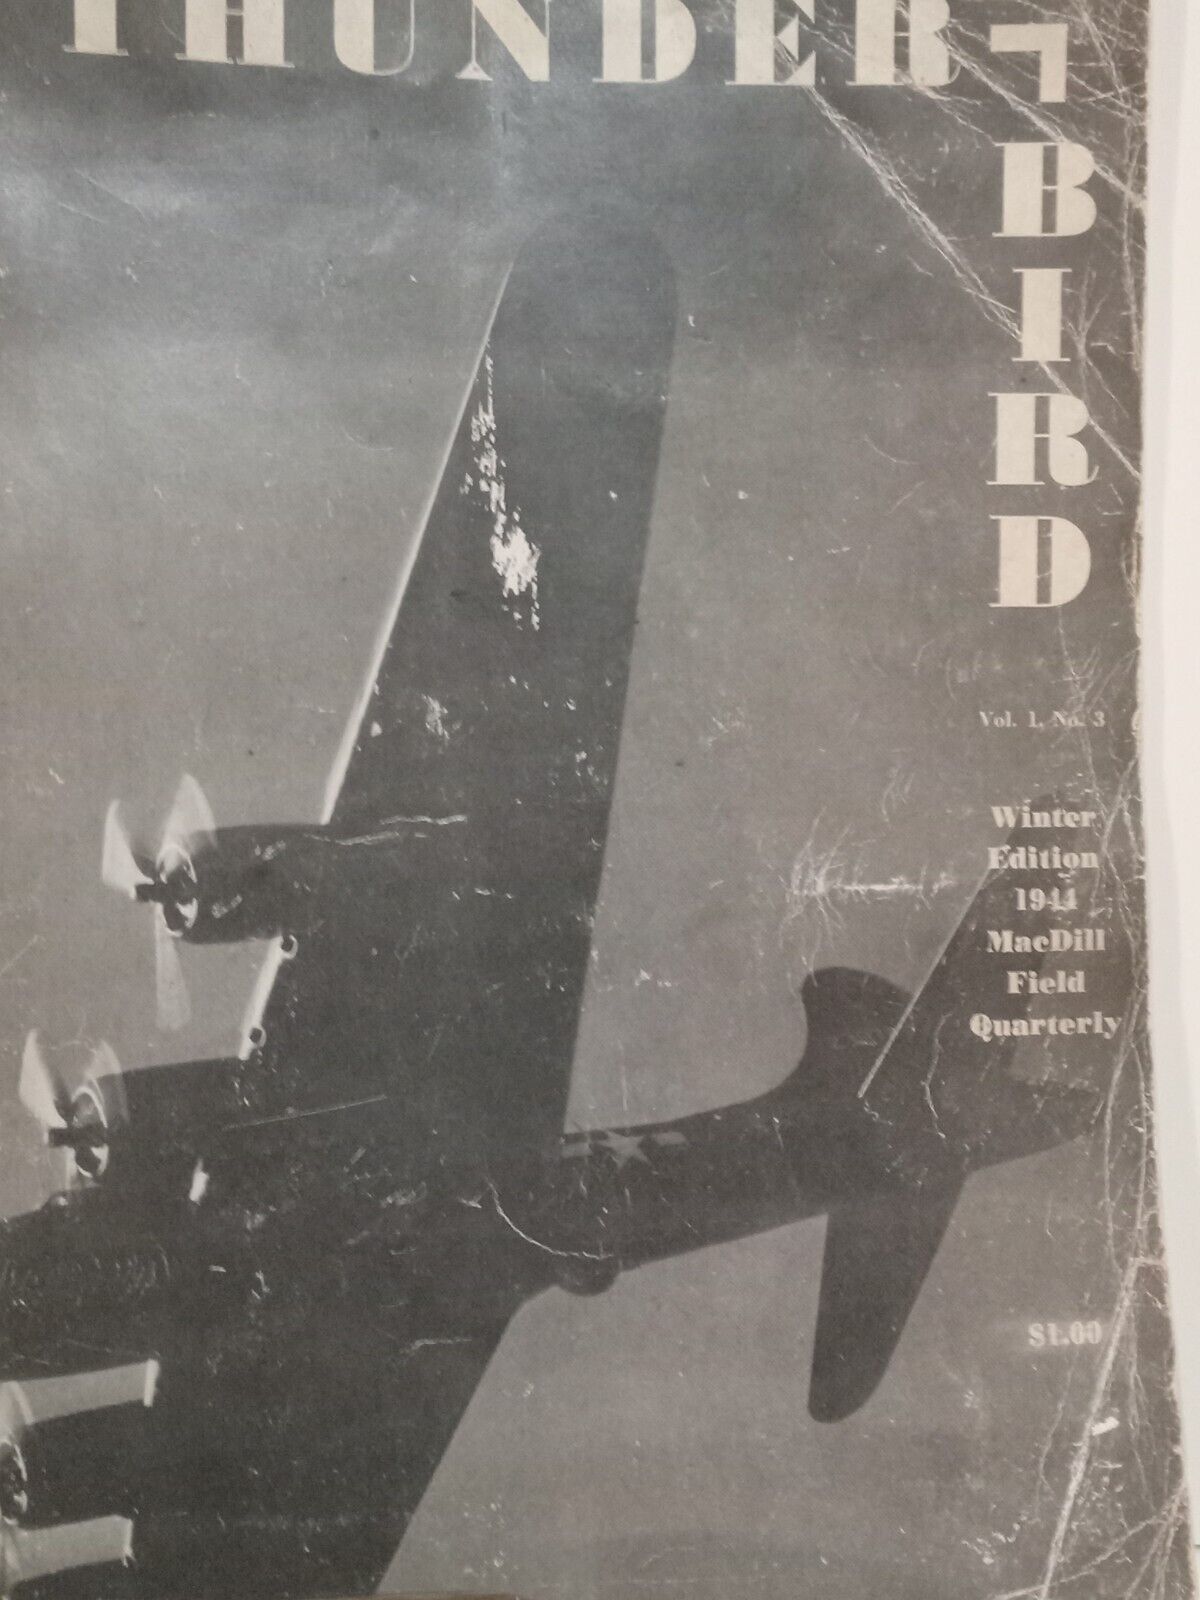 1941 Issue Thunderbird McDill *Military *Air Force *Tampa Bay *FL